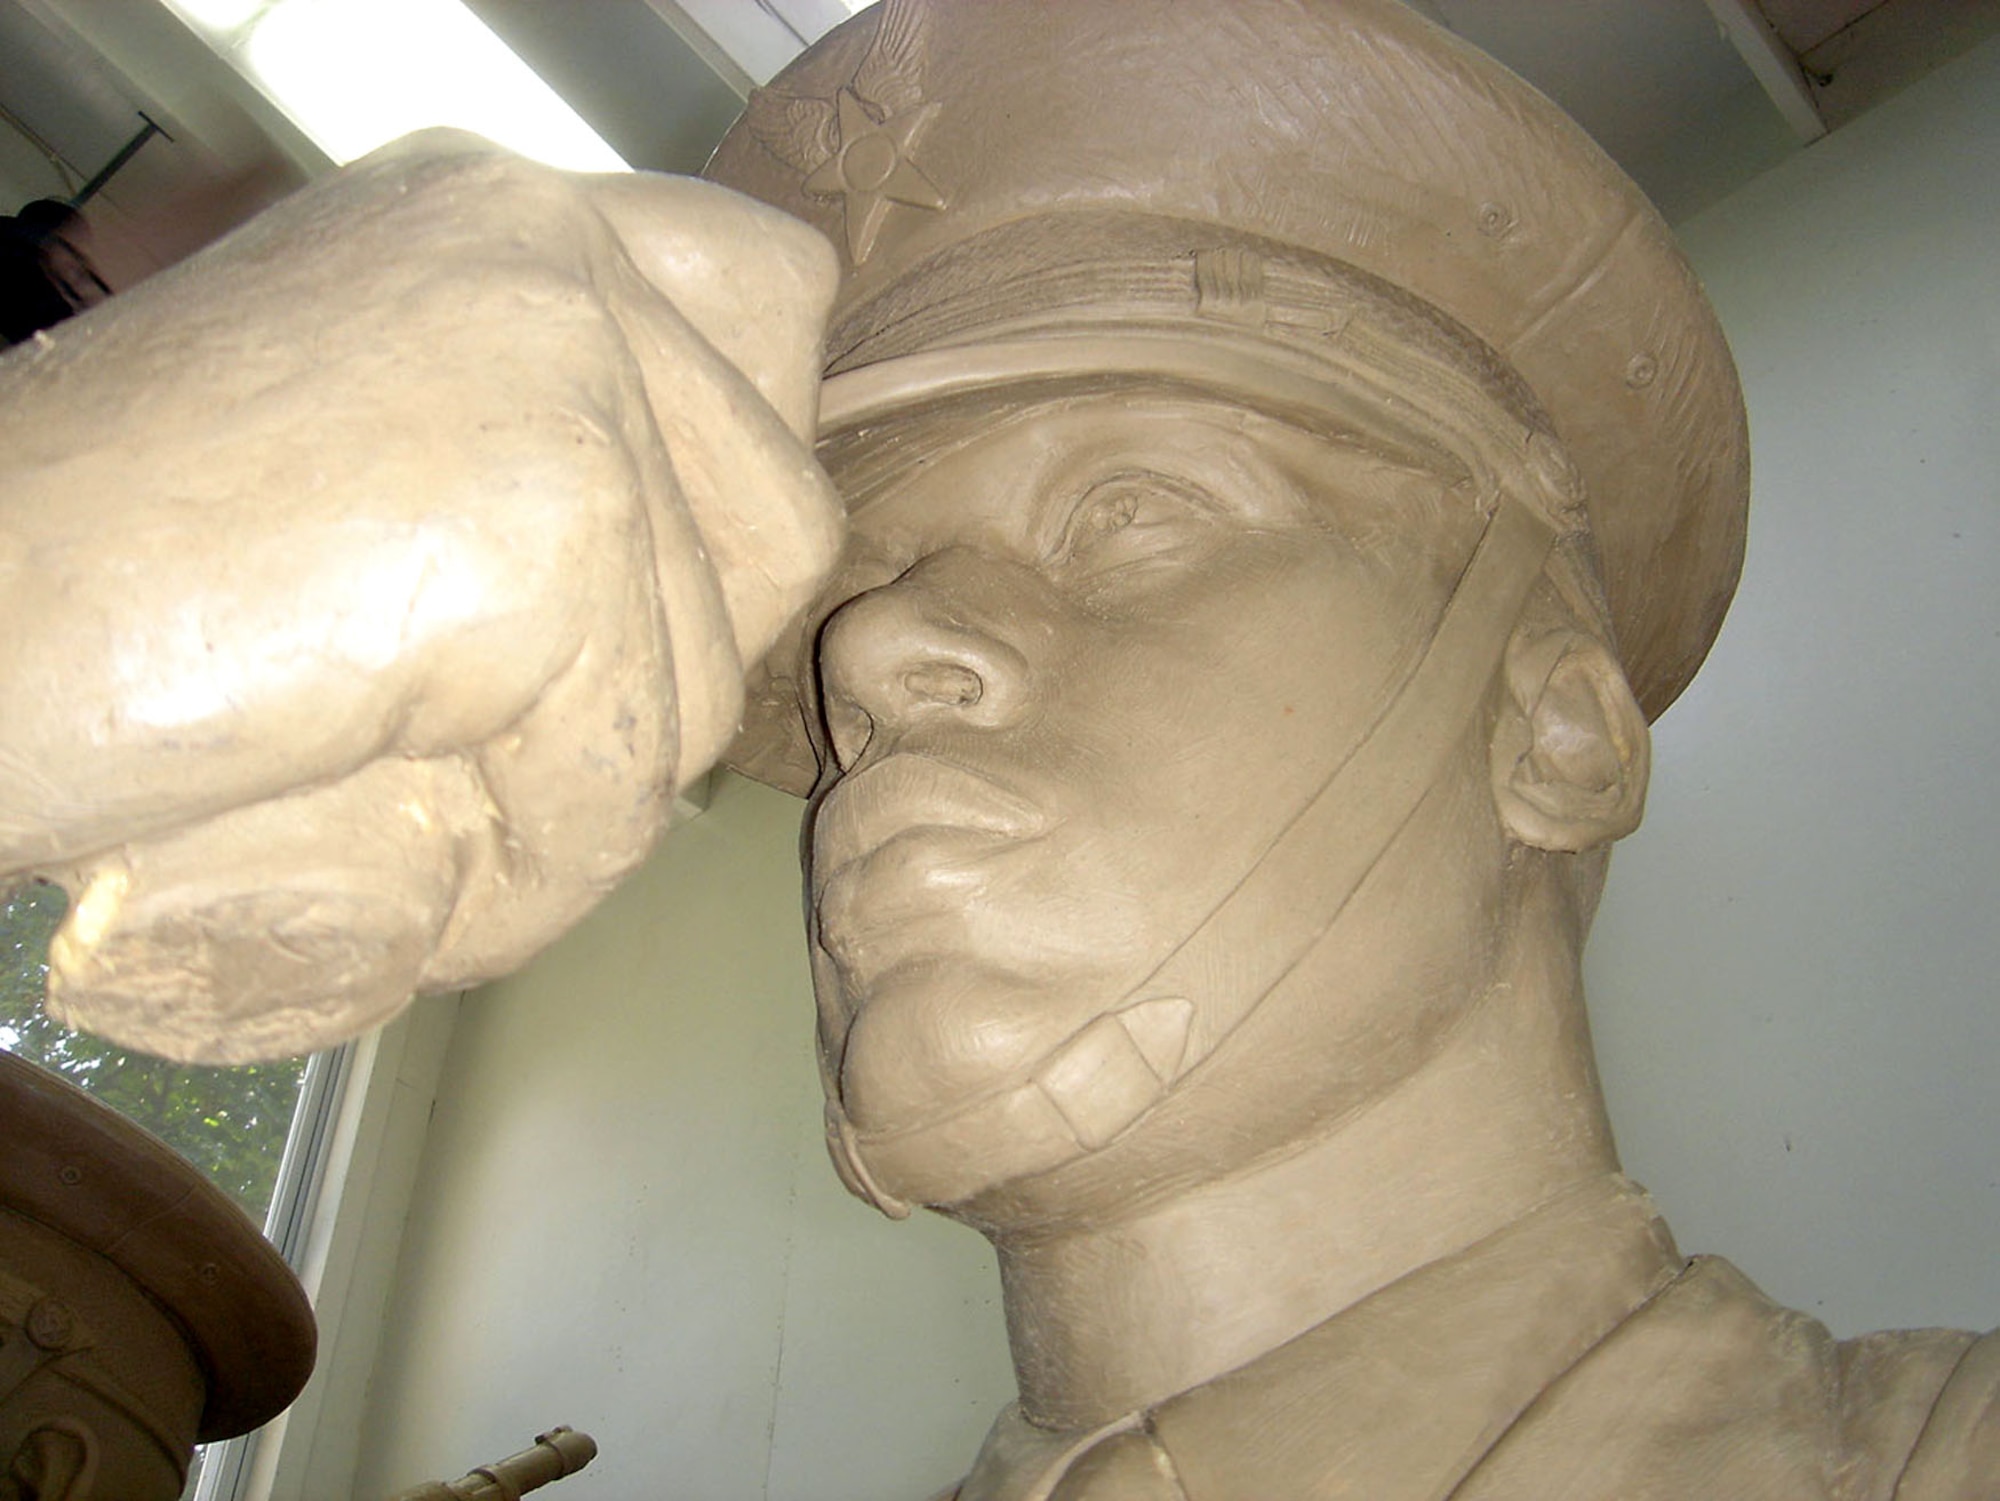 Senior Airman Michael Goodwin, United States Air Force Honor Guard,  was used as a model for one of the bronze sculptures now residing at the Air Force Memorial. (U.S. Air Force photo)                                                             